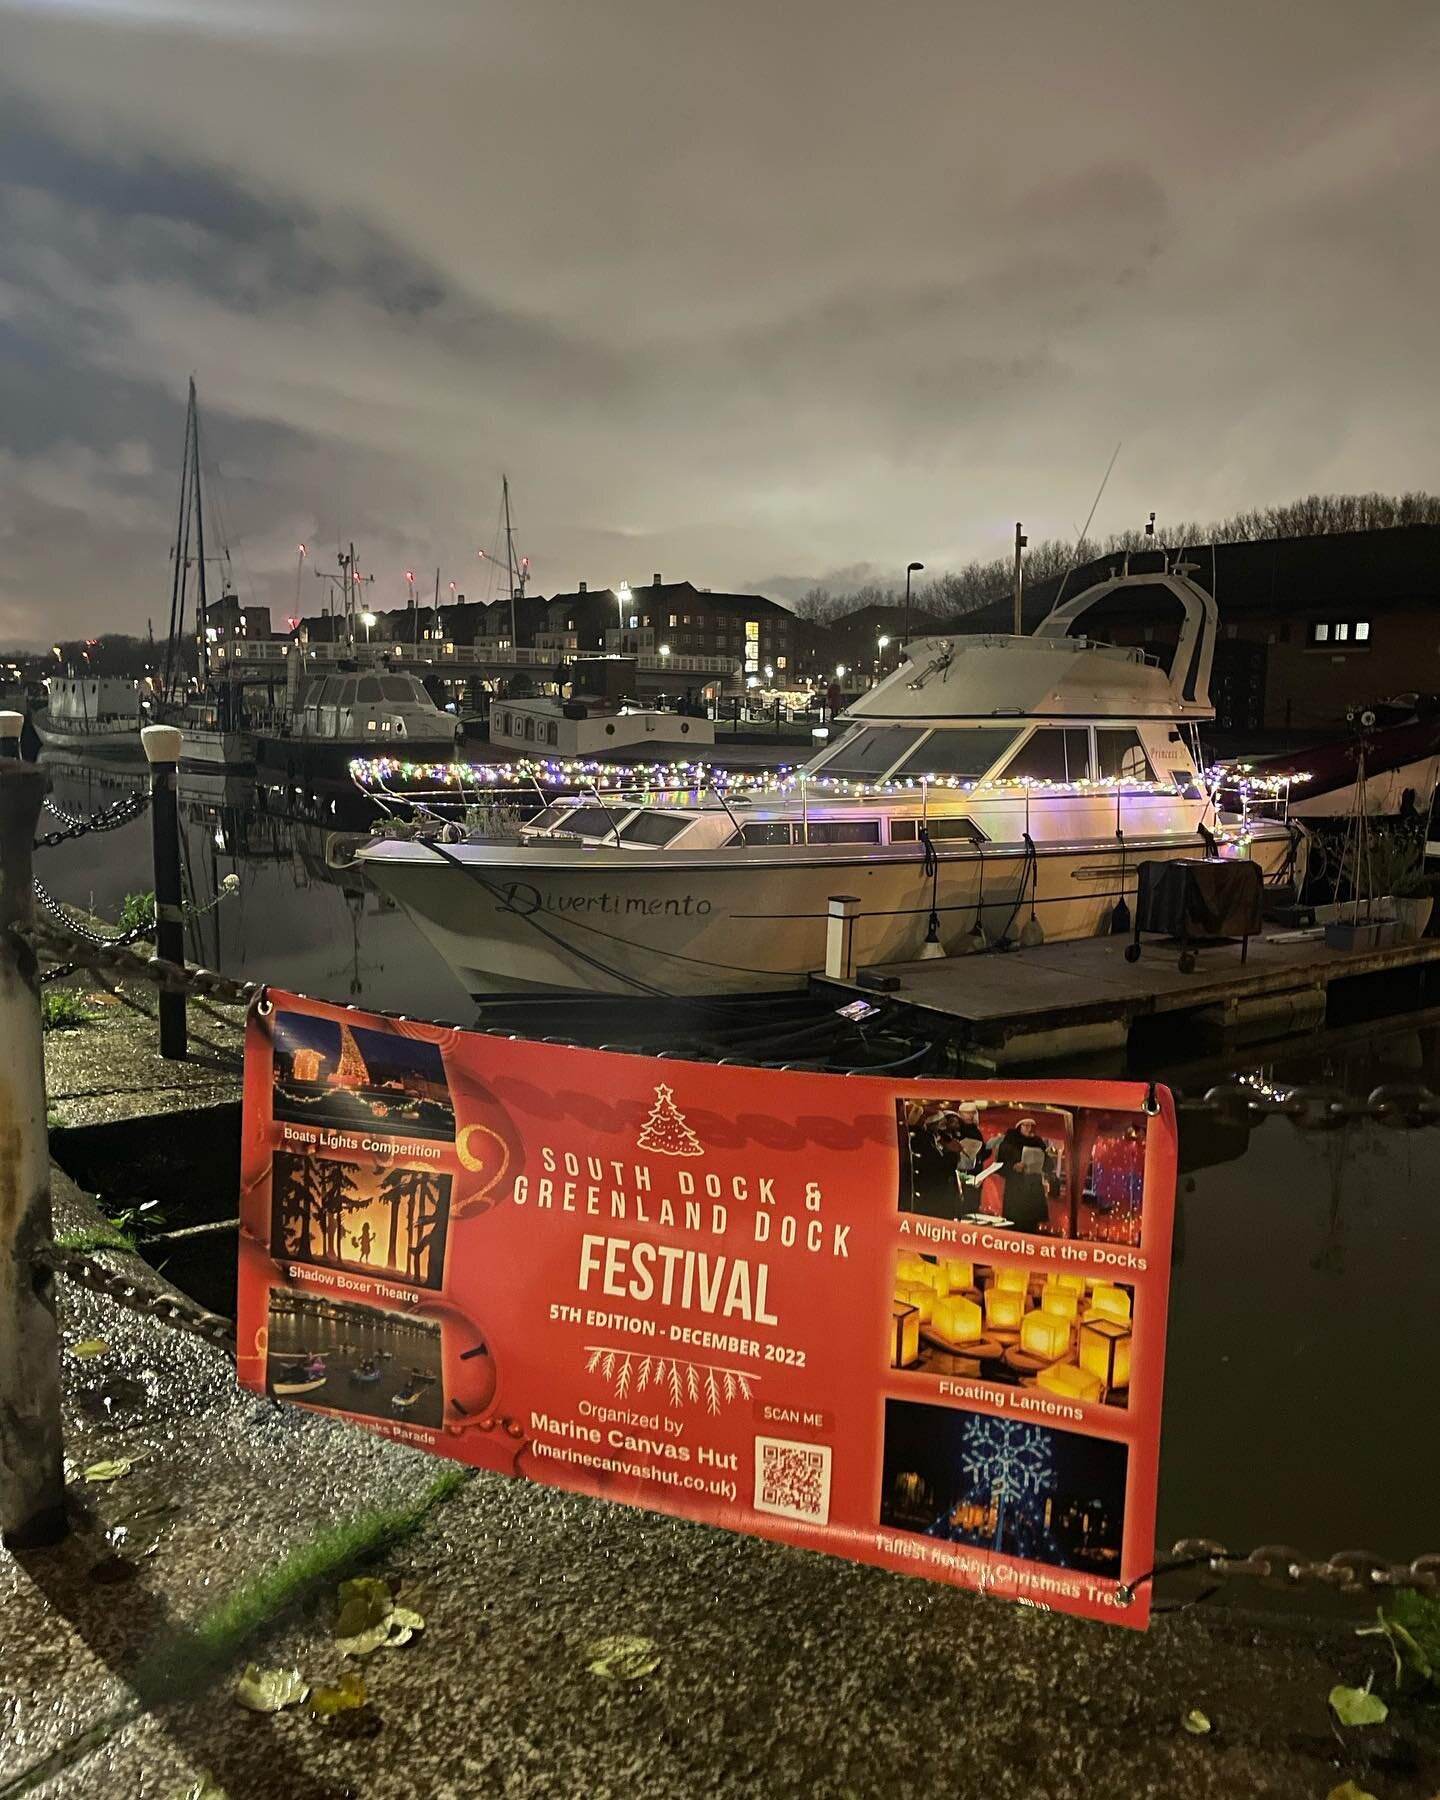 It&rsquo;s nearly time! @greenlanddockfestival #xmaslights #southdockmarina